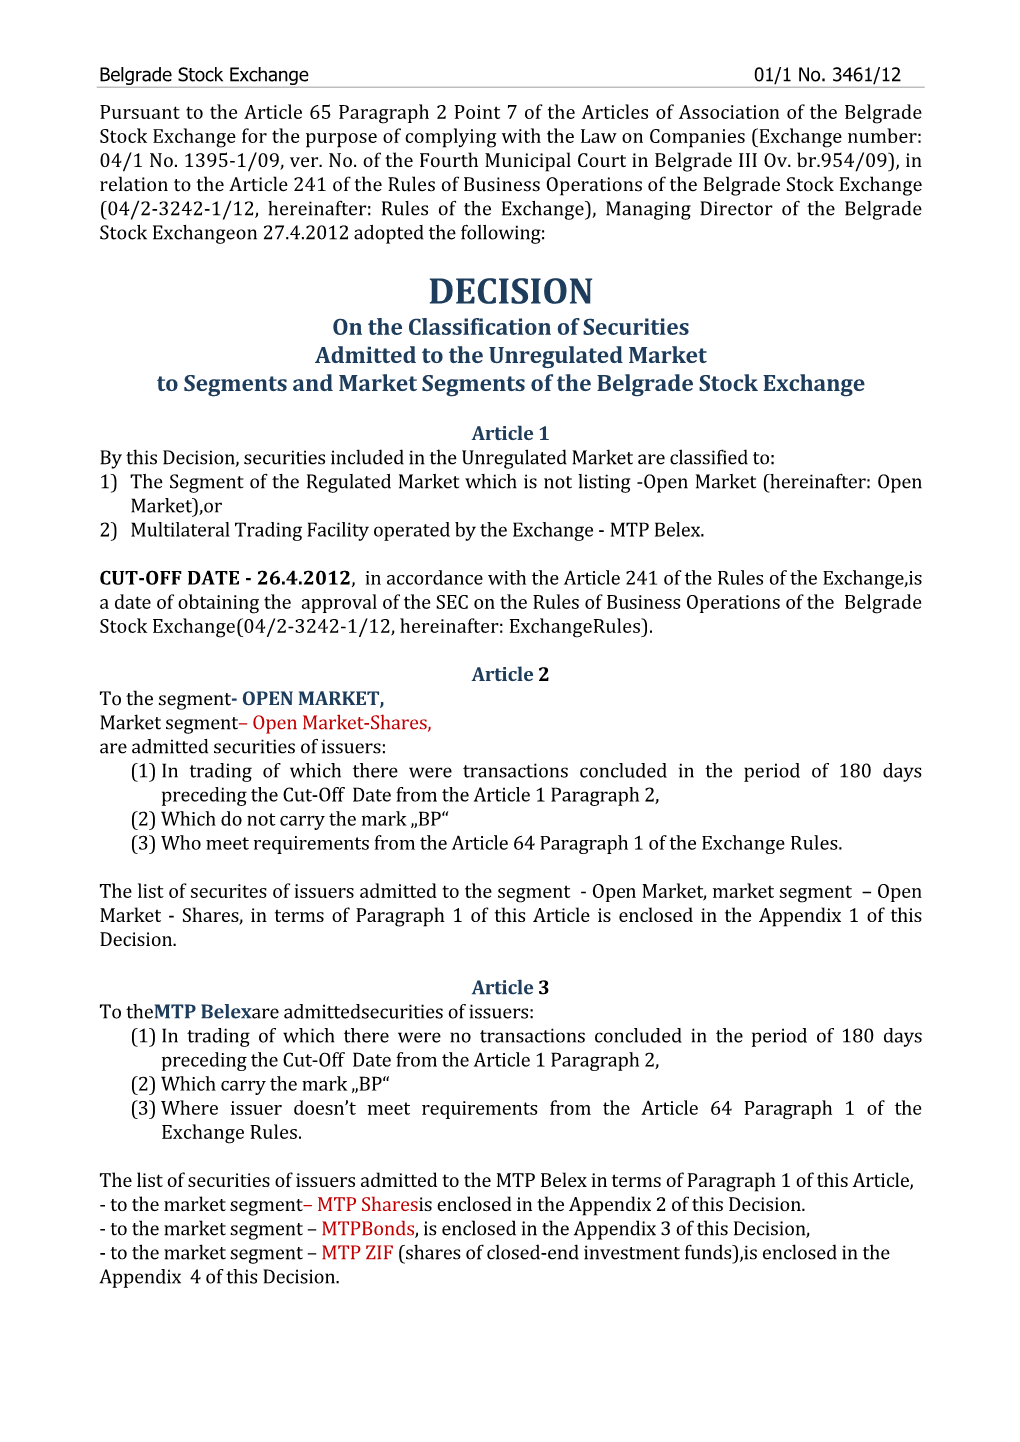 DECISION on the Classification of Securities Admitted to the Unregulated Market to Segments and Market Segments of the Belgrade Stock Exchange